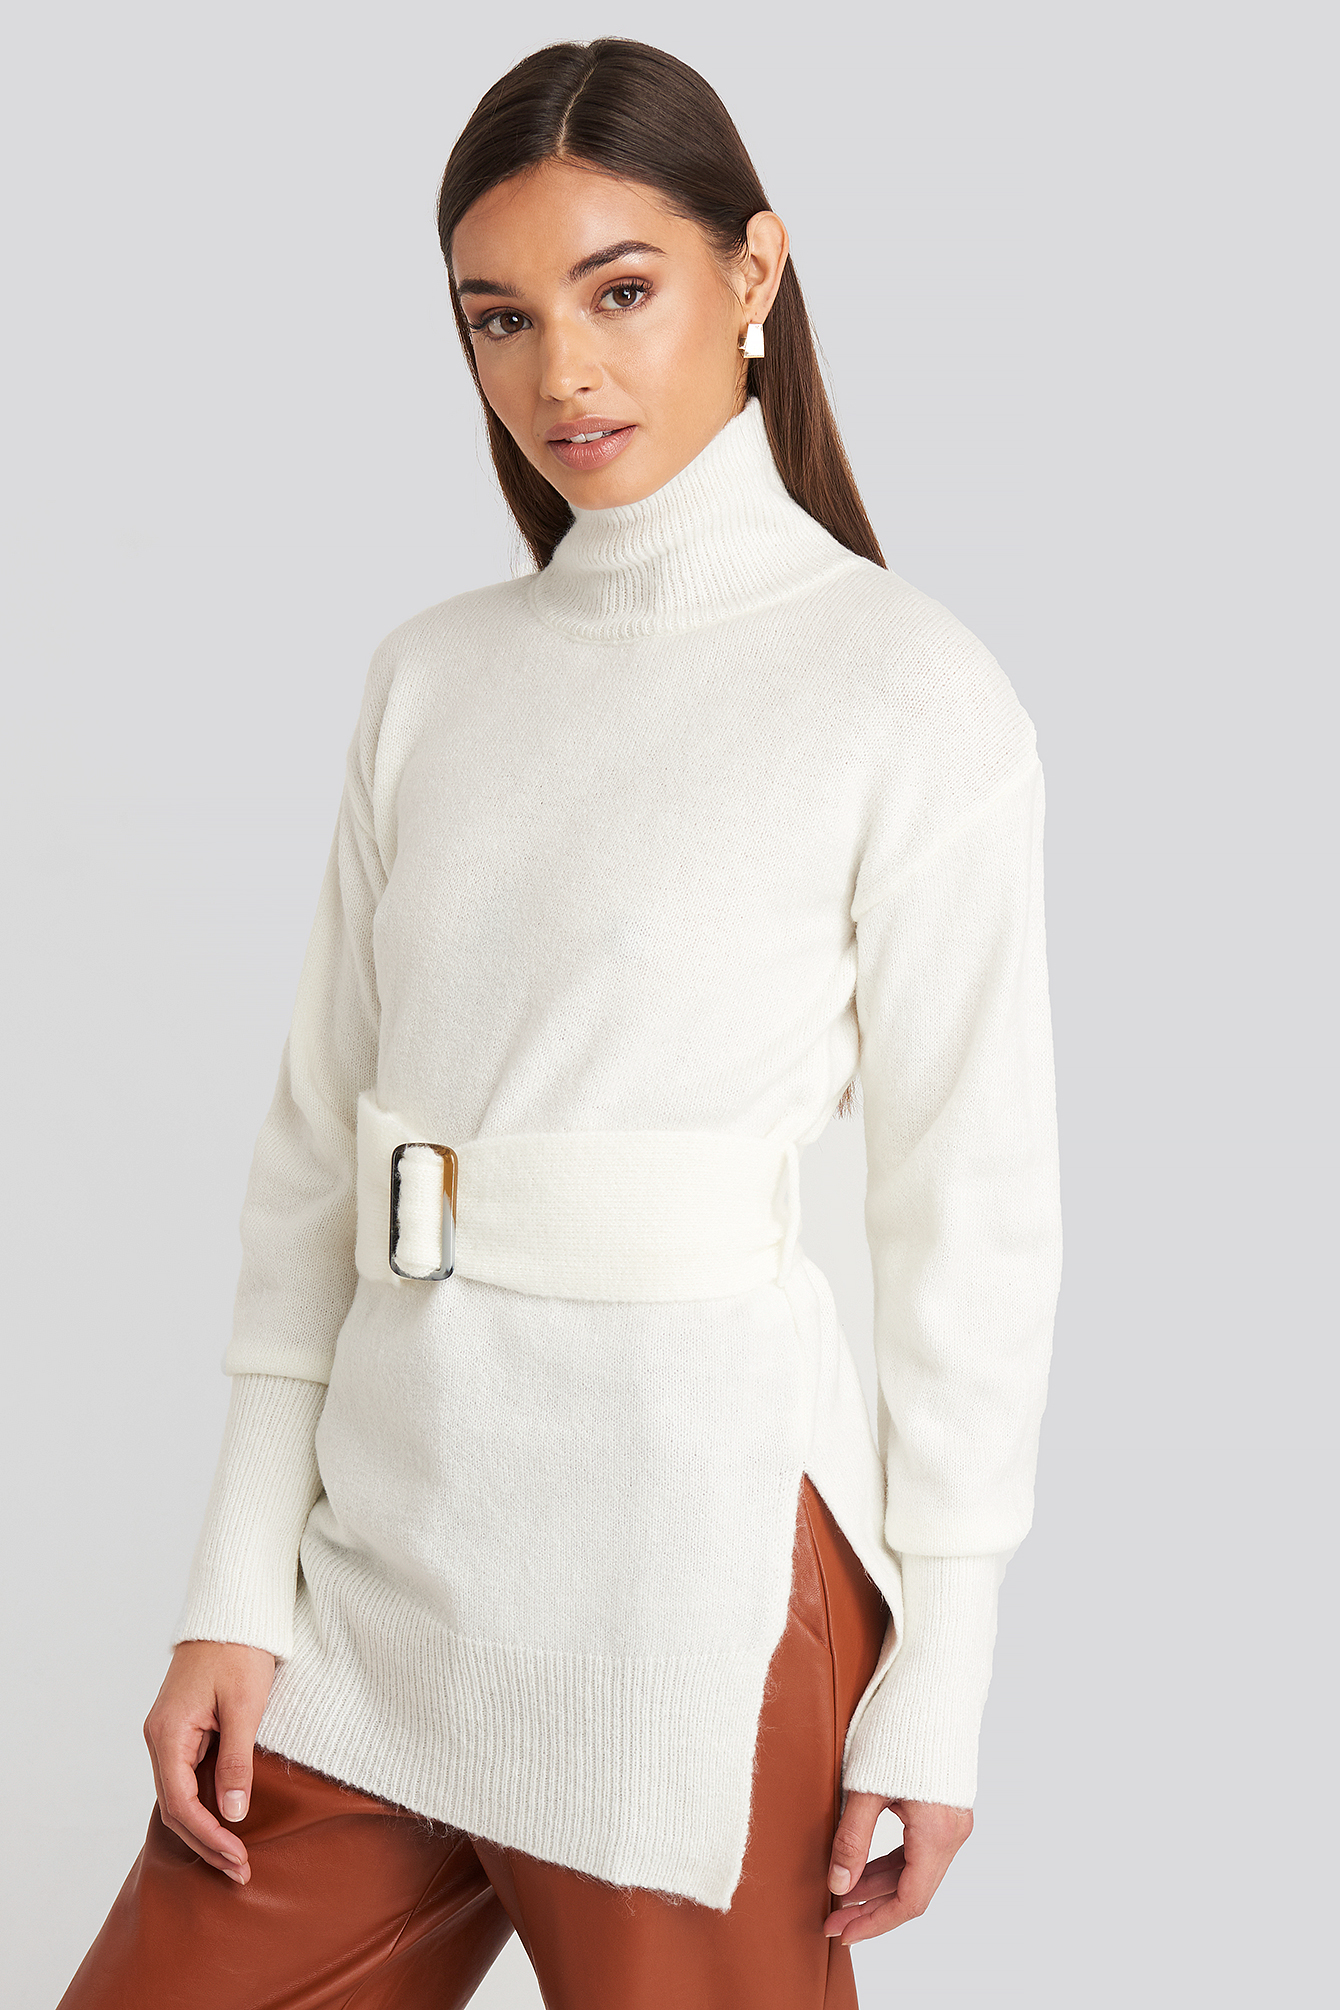 Offwhite Buckle Belt Knitted Sweater